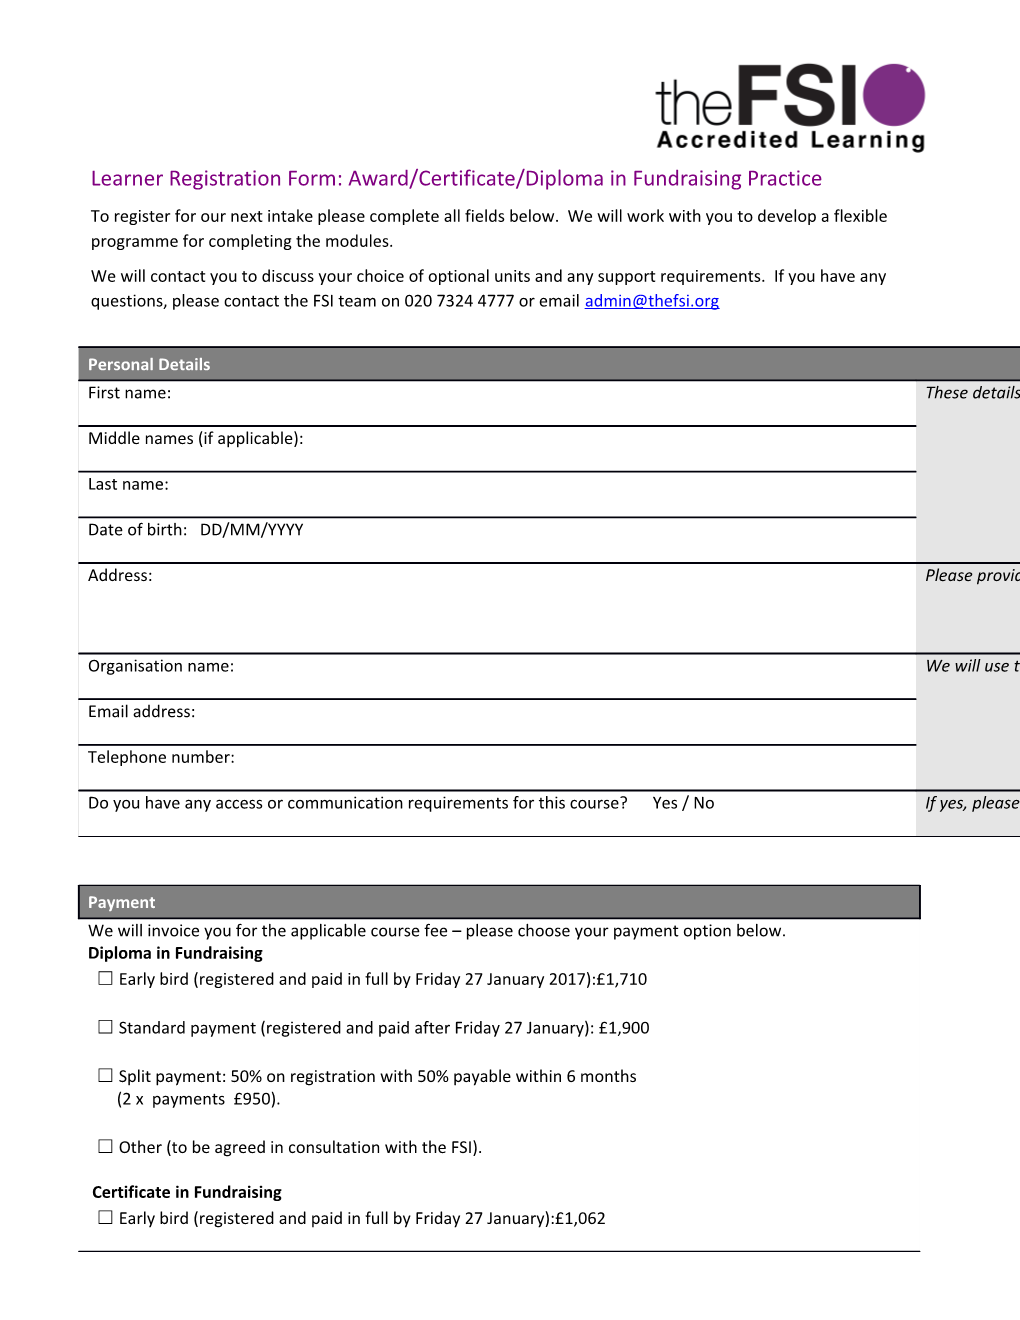 Learner Registration Form: Award/Certificate/Diploma in Fundraising Practice